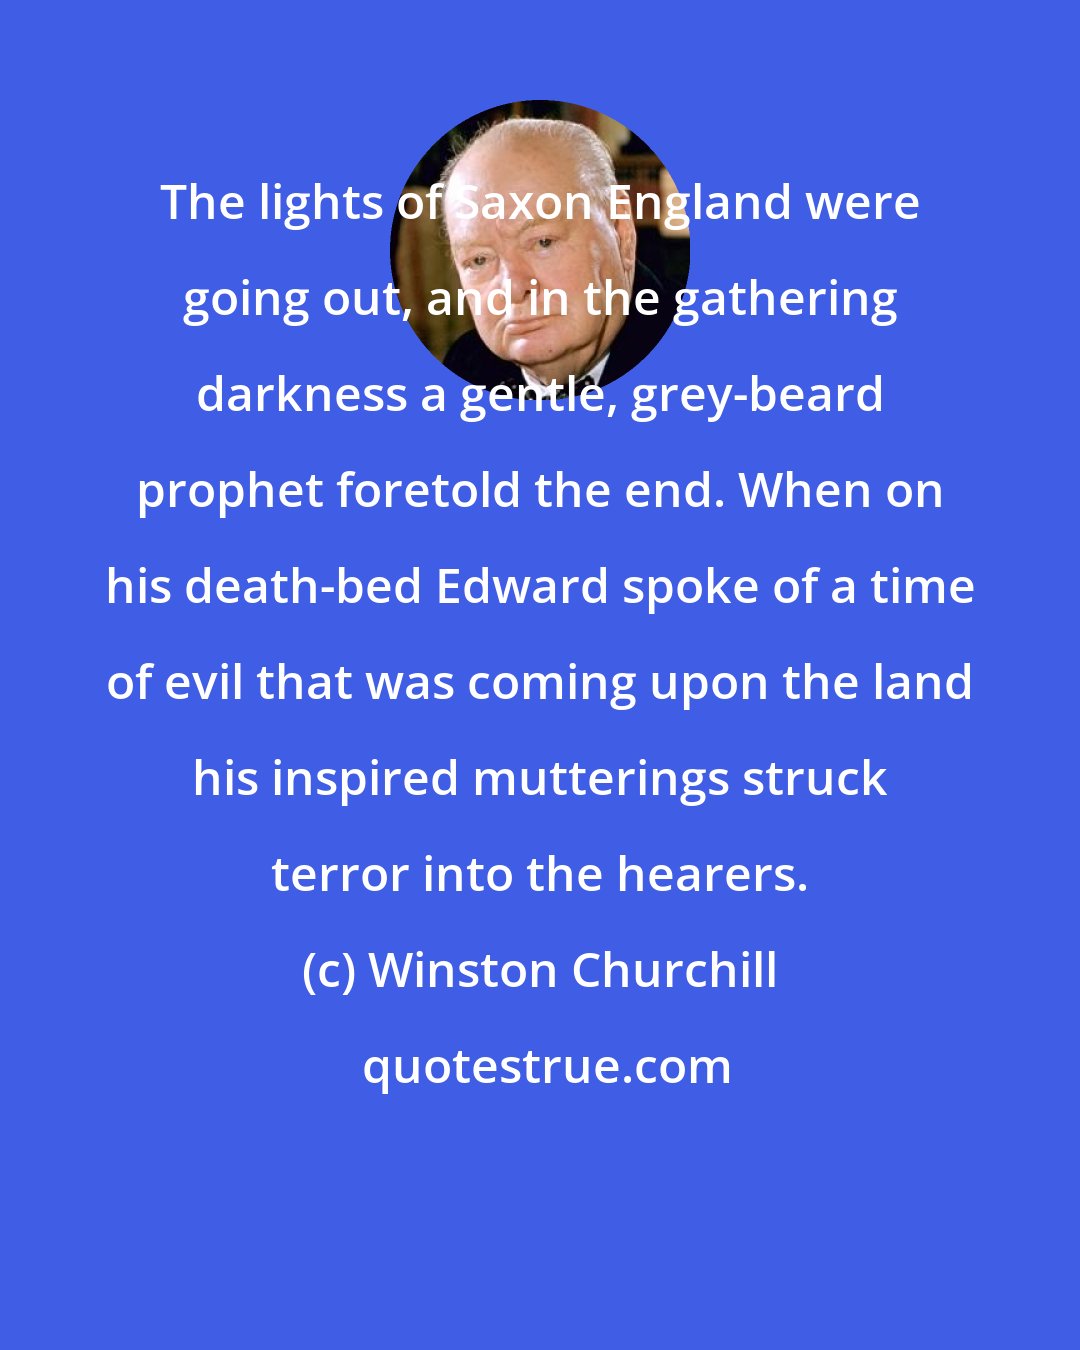 Winston Churchill: The lights of Saxon England were going out, and in the gathering darkness a gentle, grey-beard prophet foretold the end. When on his death-bed Edward spoke of a time of evil that was coming upon the land his inspired mutterings struck terror into the hearers.